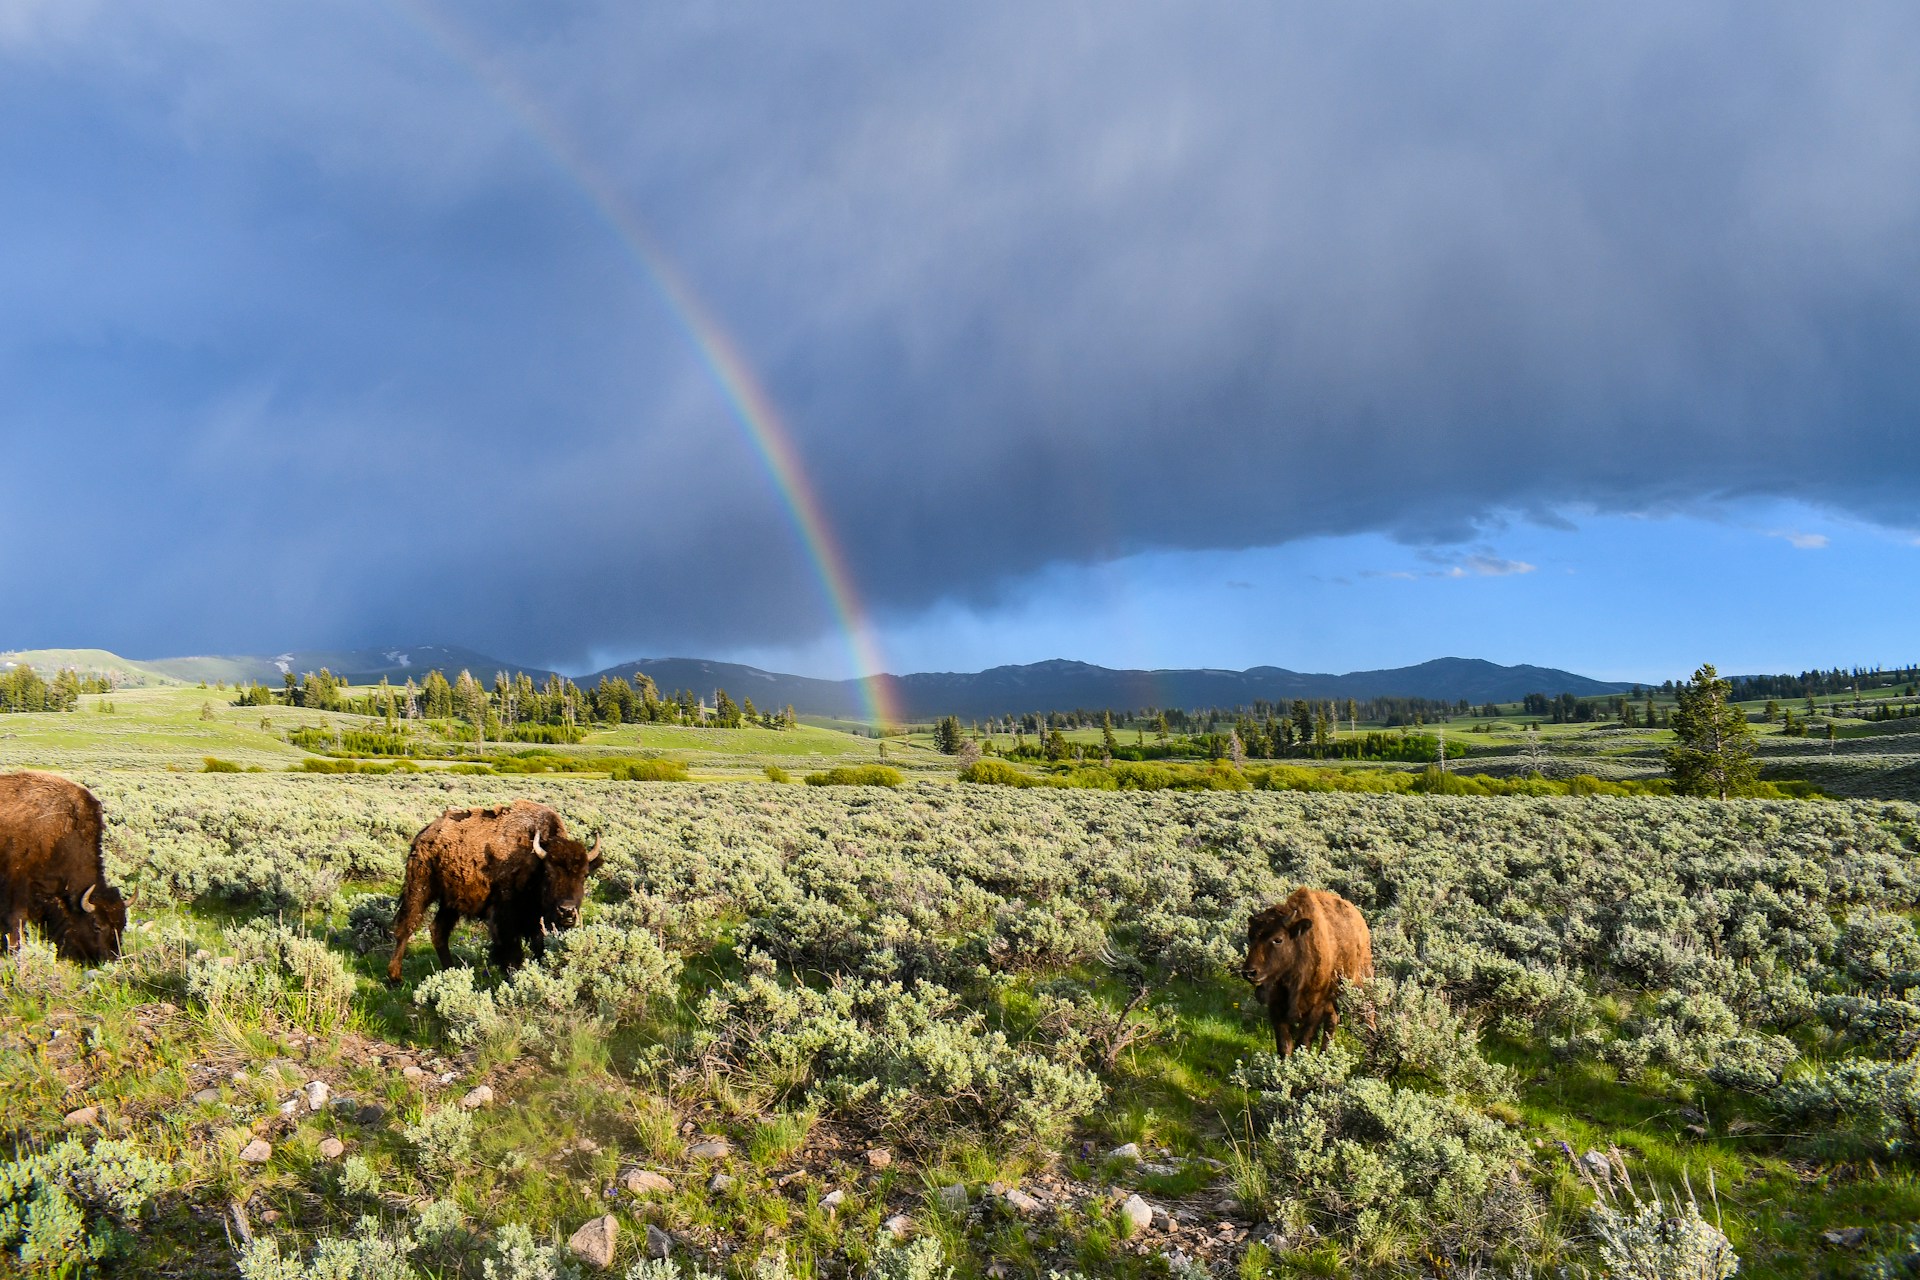 Bison standing in an open prairie with rain clouds and a rainbow in the background